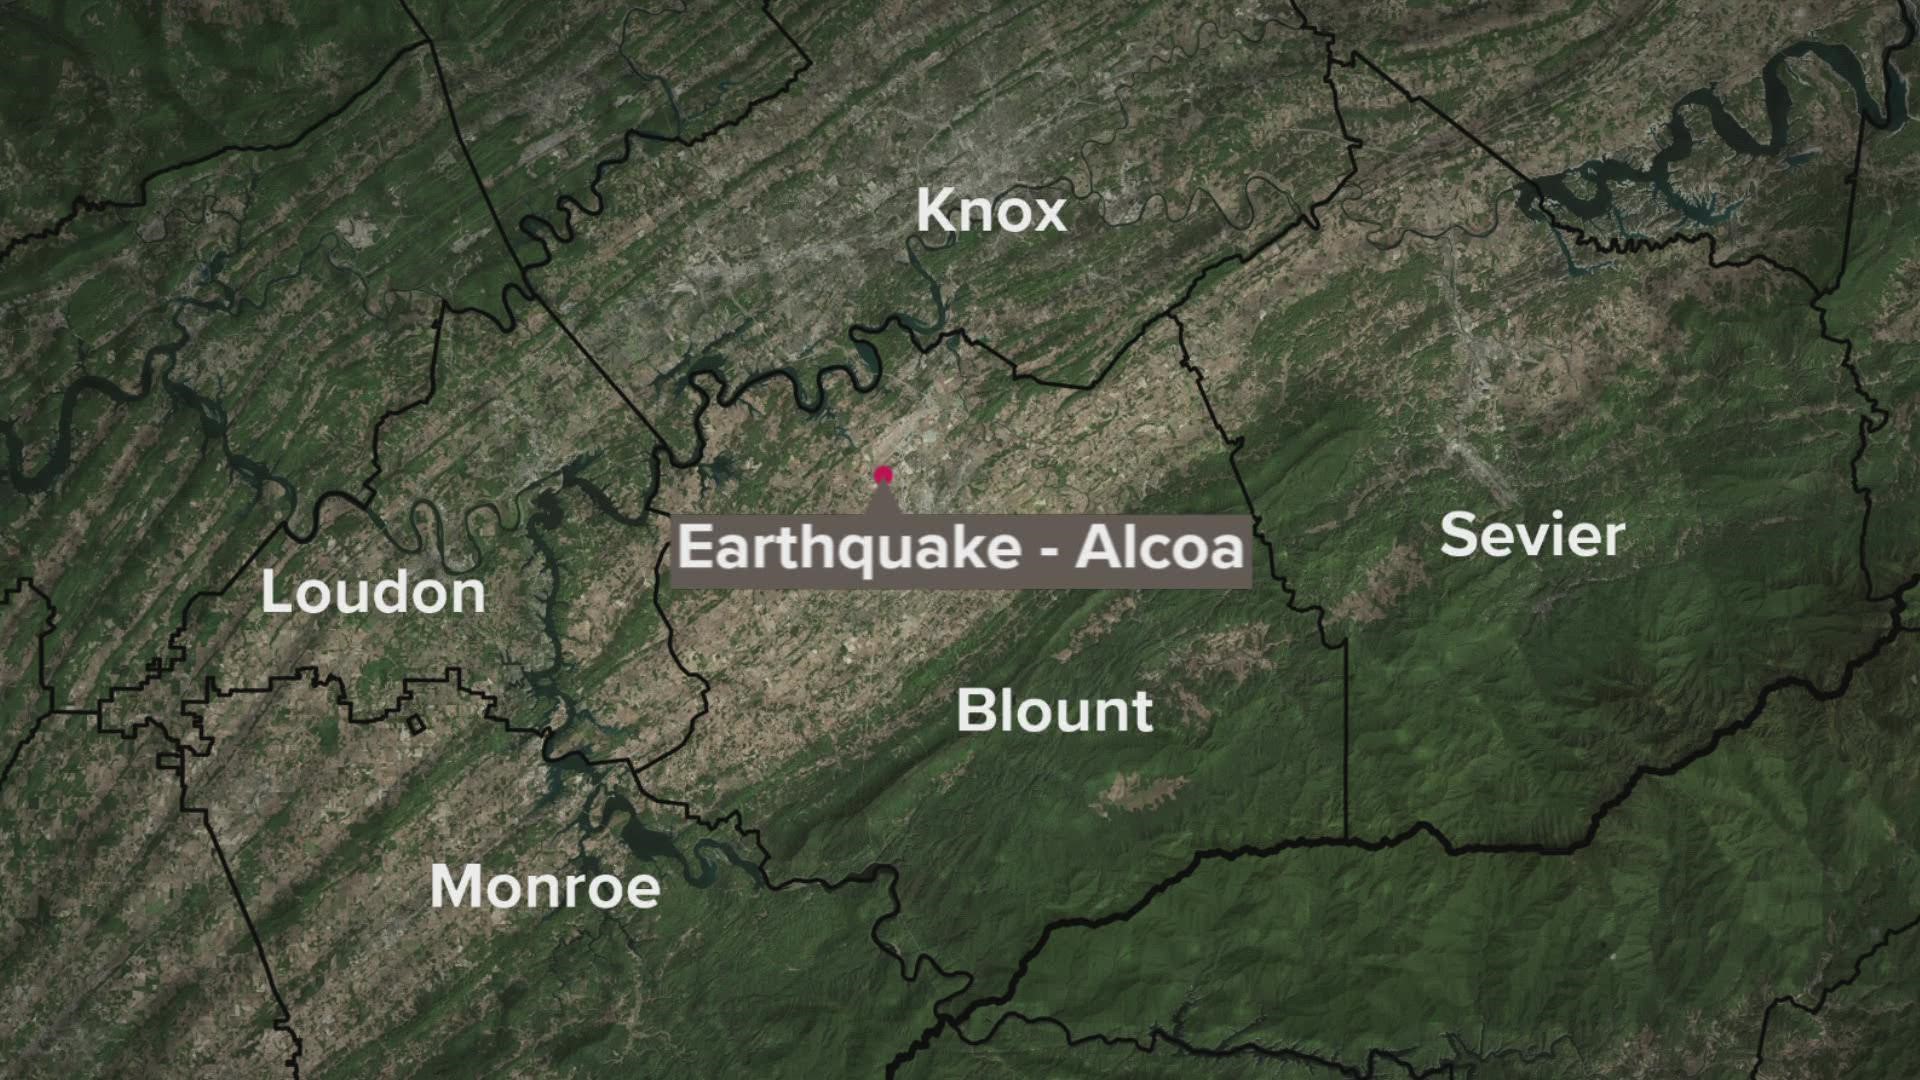 The United States Geological Survey recorded a 2.2 magnitude earthquake near Alcoa early Sunday evening.